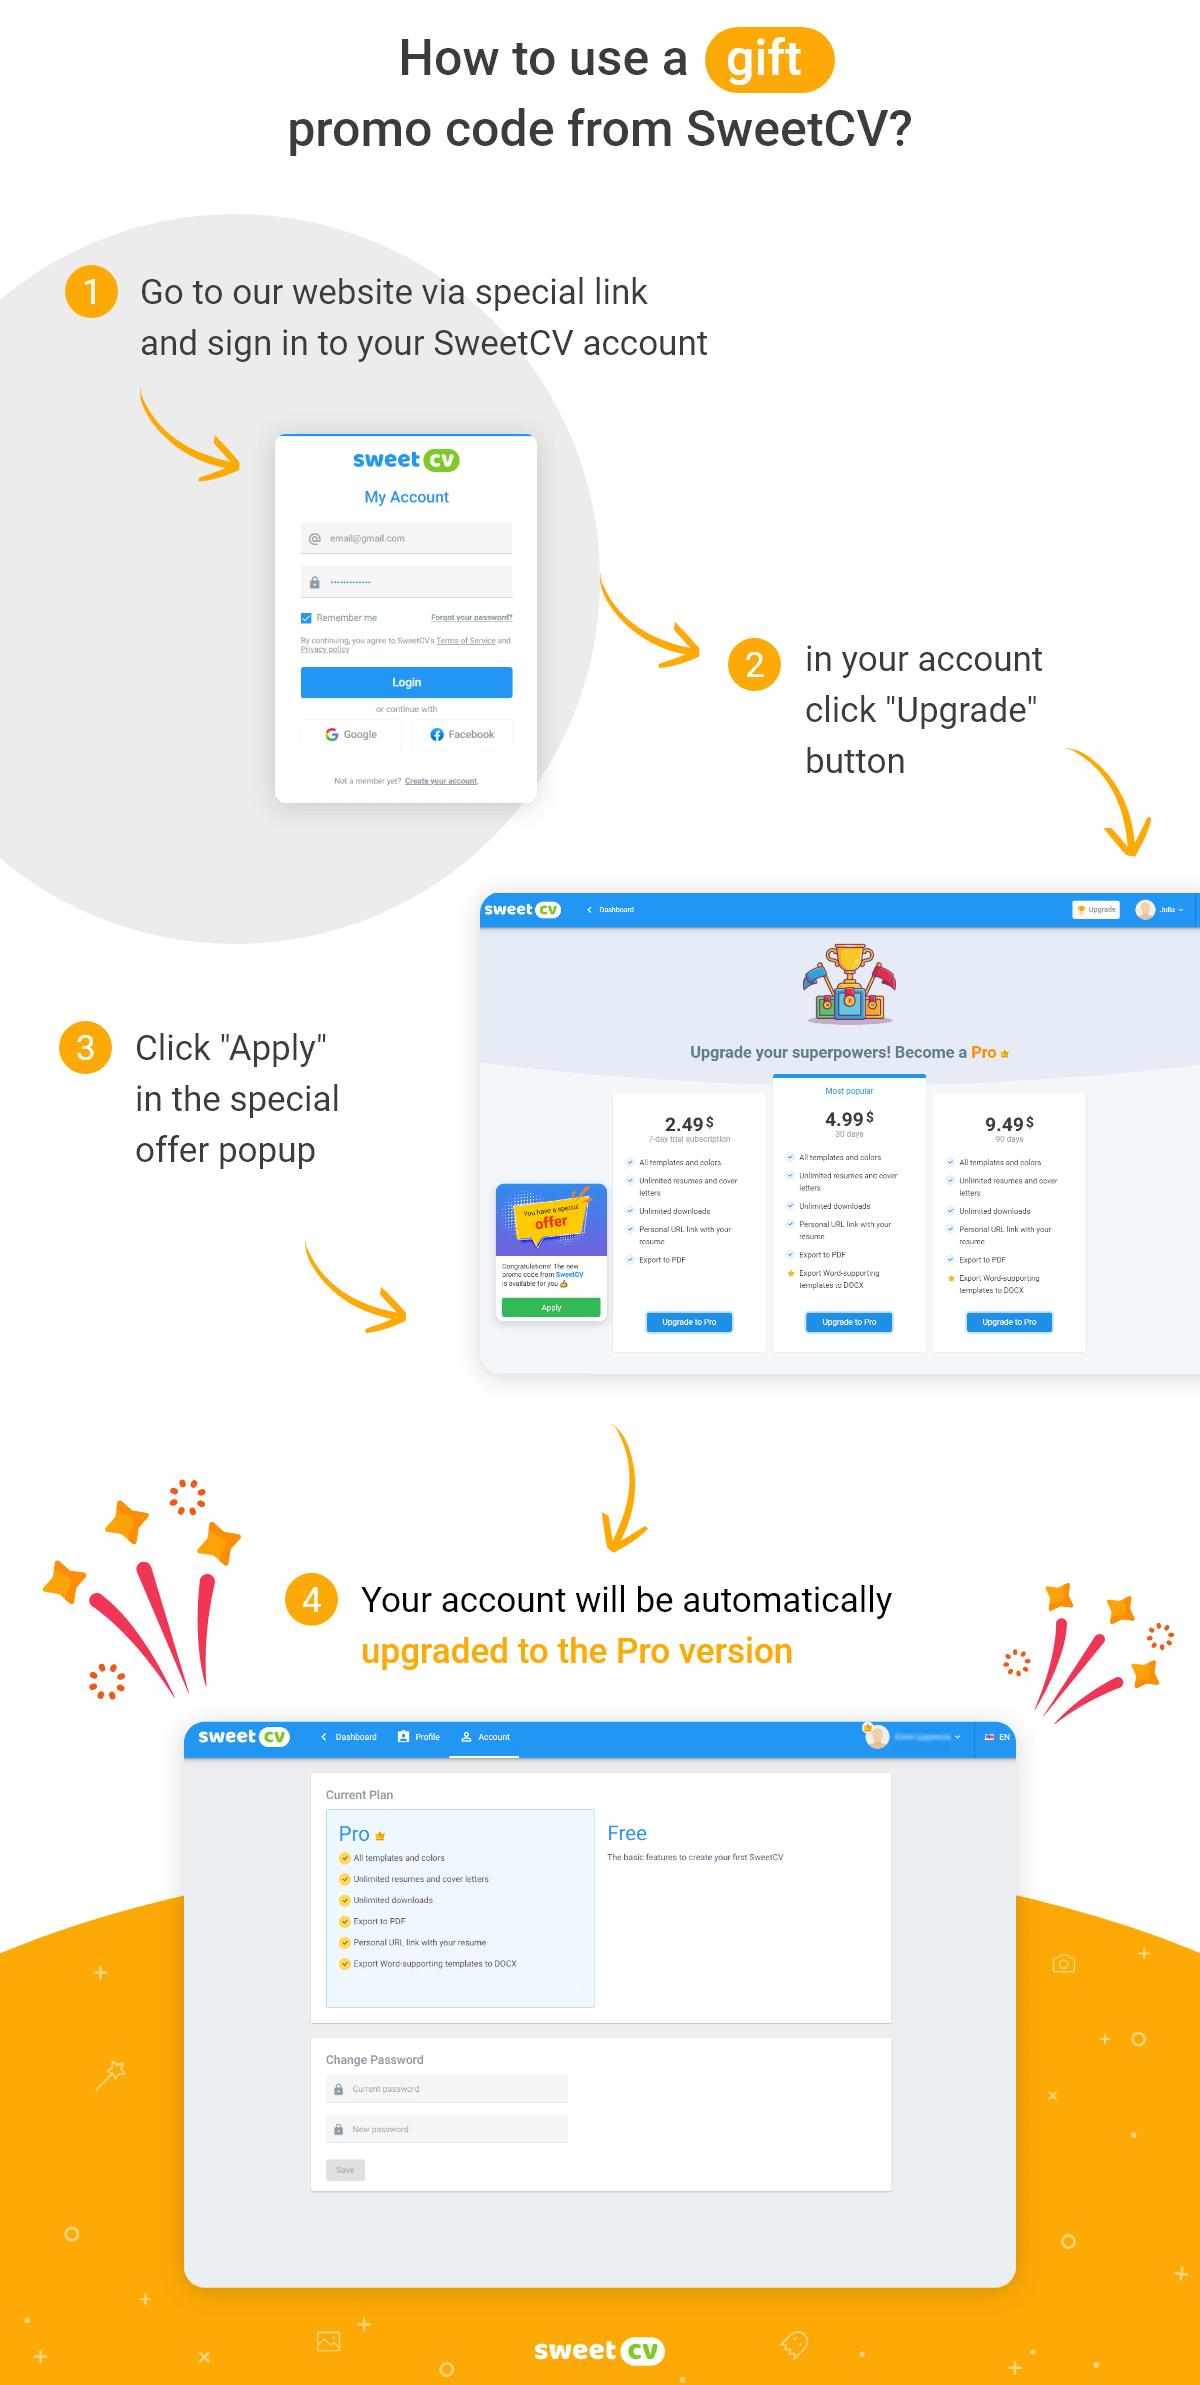 How to use a gift promo code from SweetCV?